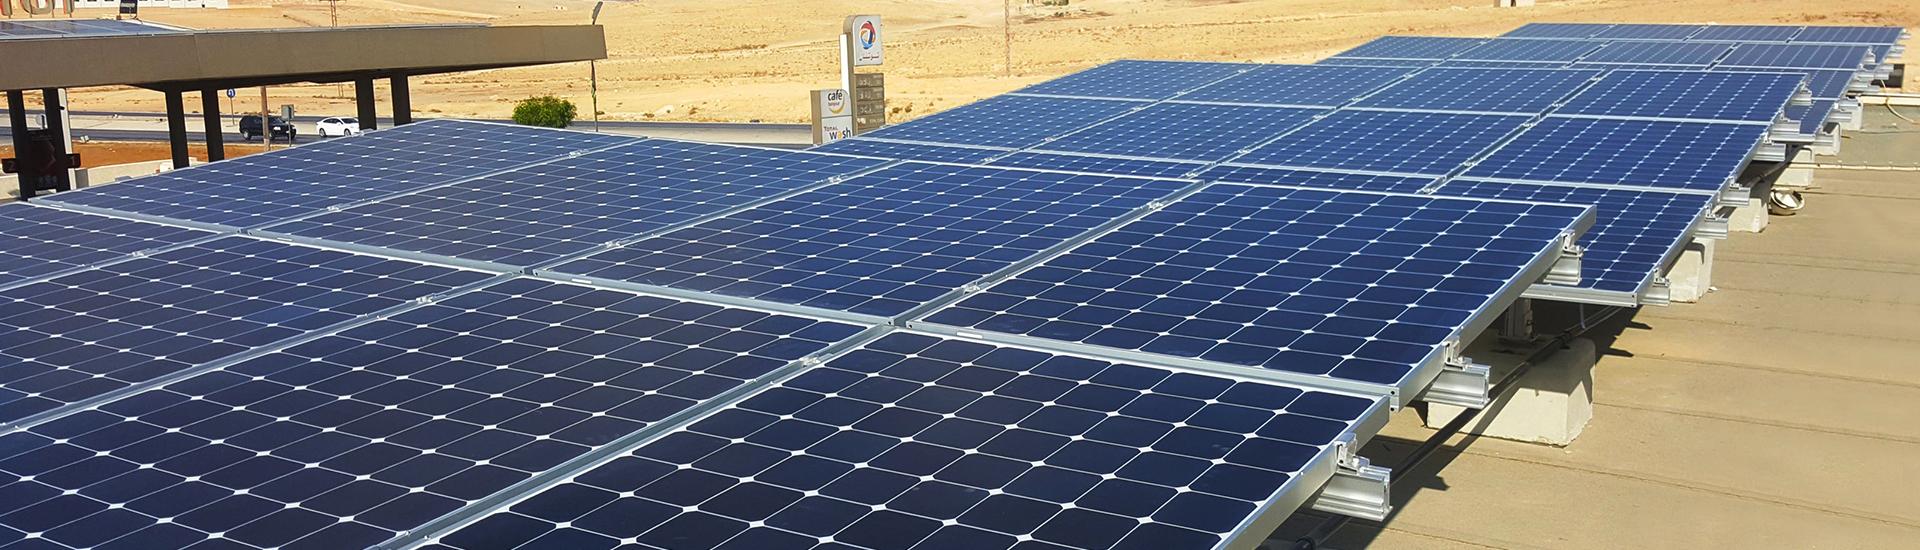 An installation of SunPower Solar Panels on the rooftop of a TotalEnergies​ service station in Jordan.
